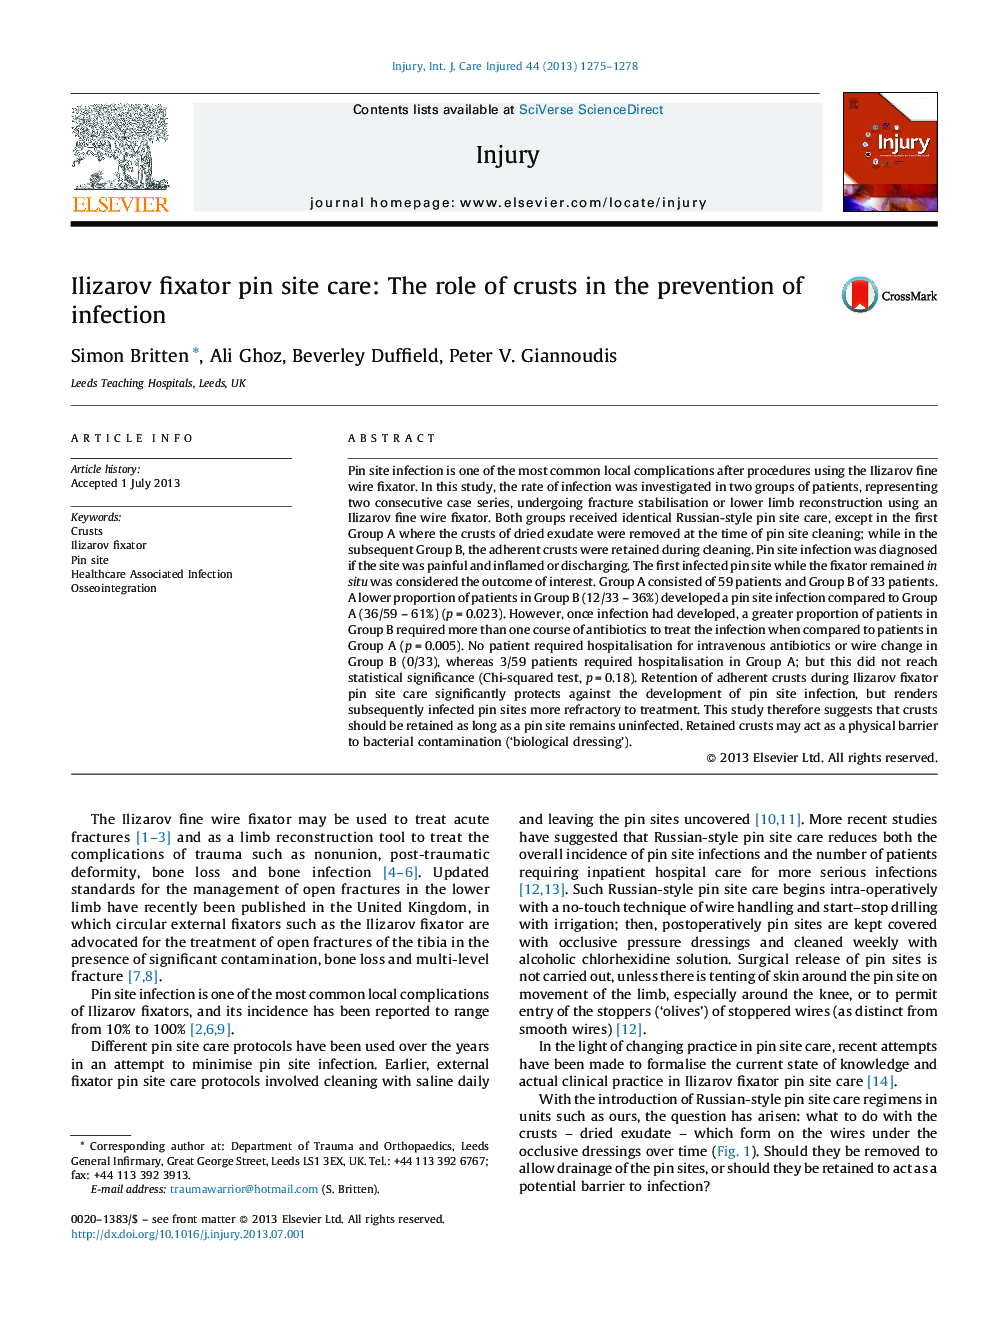 Ilizarov fixator pin site care: The role of crusts in the prevention of infection